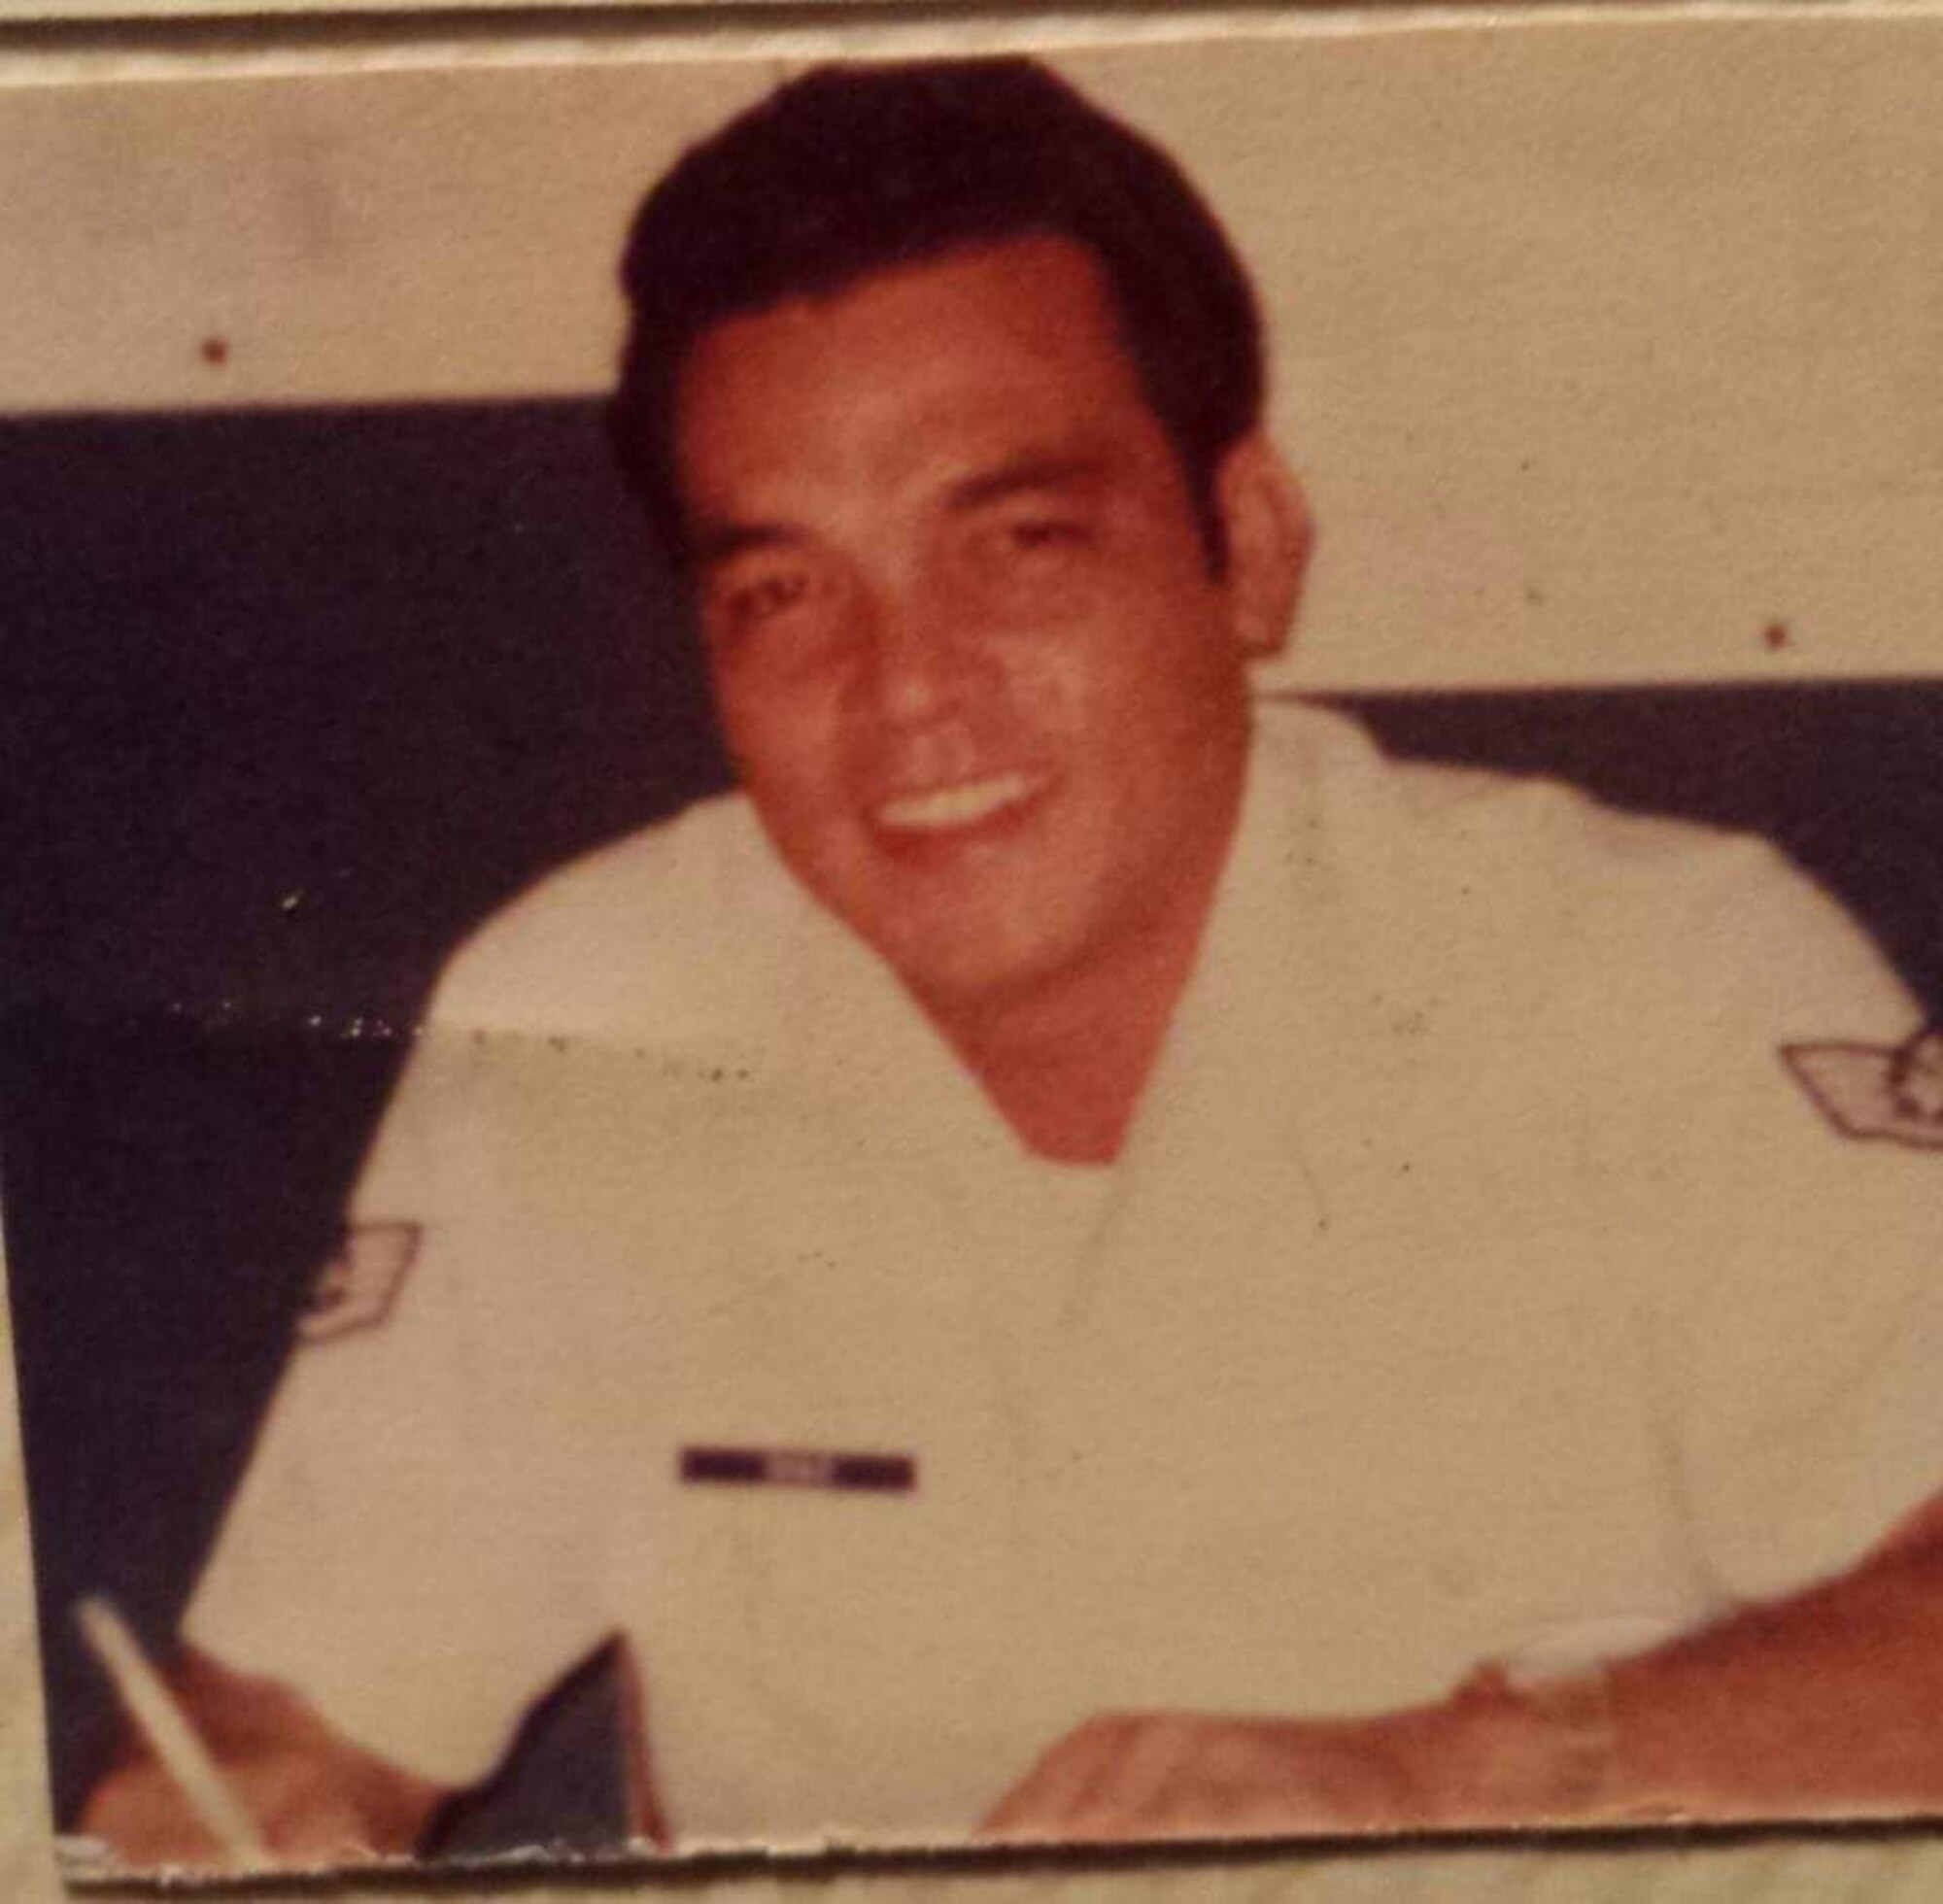 Frank Diaz, a retired U.S. Air Force master sergeant and father of Judith Sanchez, 36th Wing program analyst, works on Andersen Air Force Base, Guam, Aug. 12, 1976. Diaz served as an active duty Airman for 21 years. (Photo courtesy of Judith Sanchez)